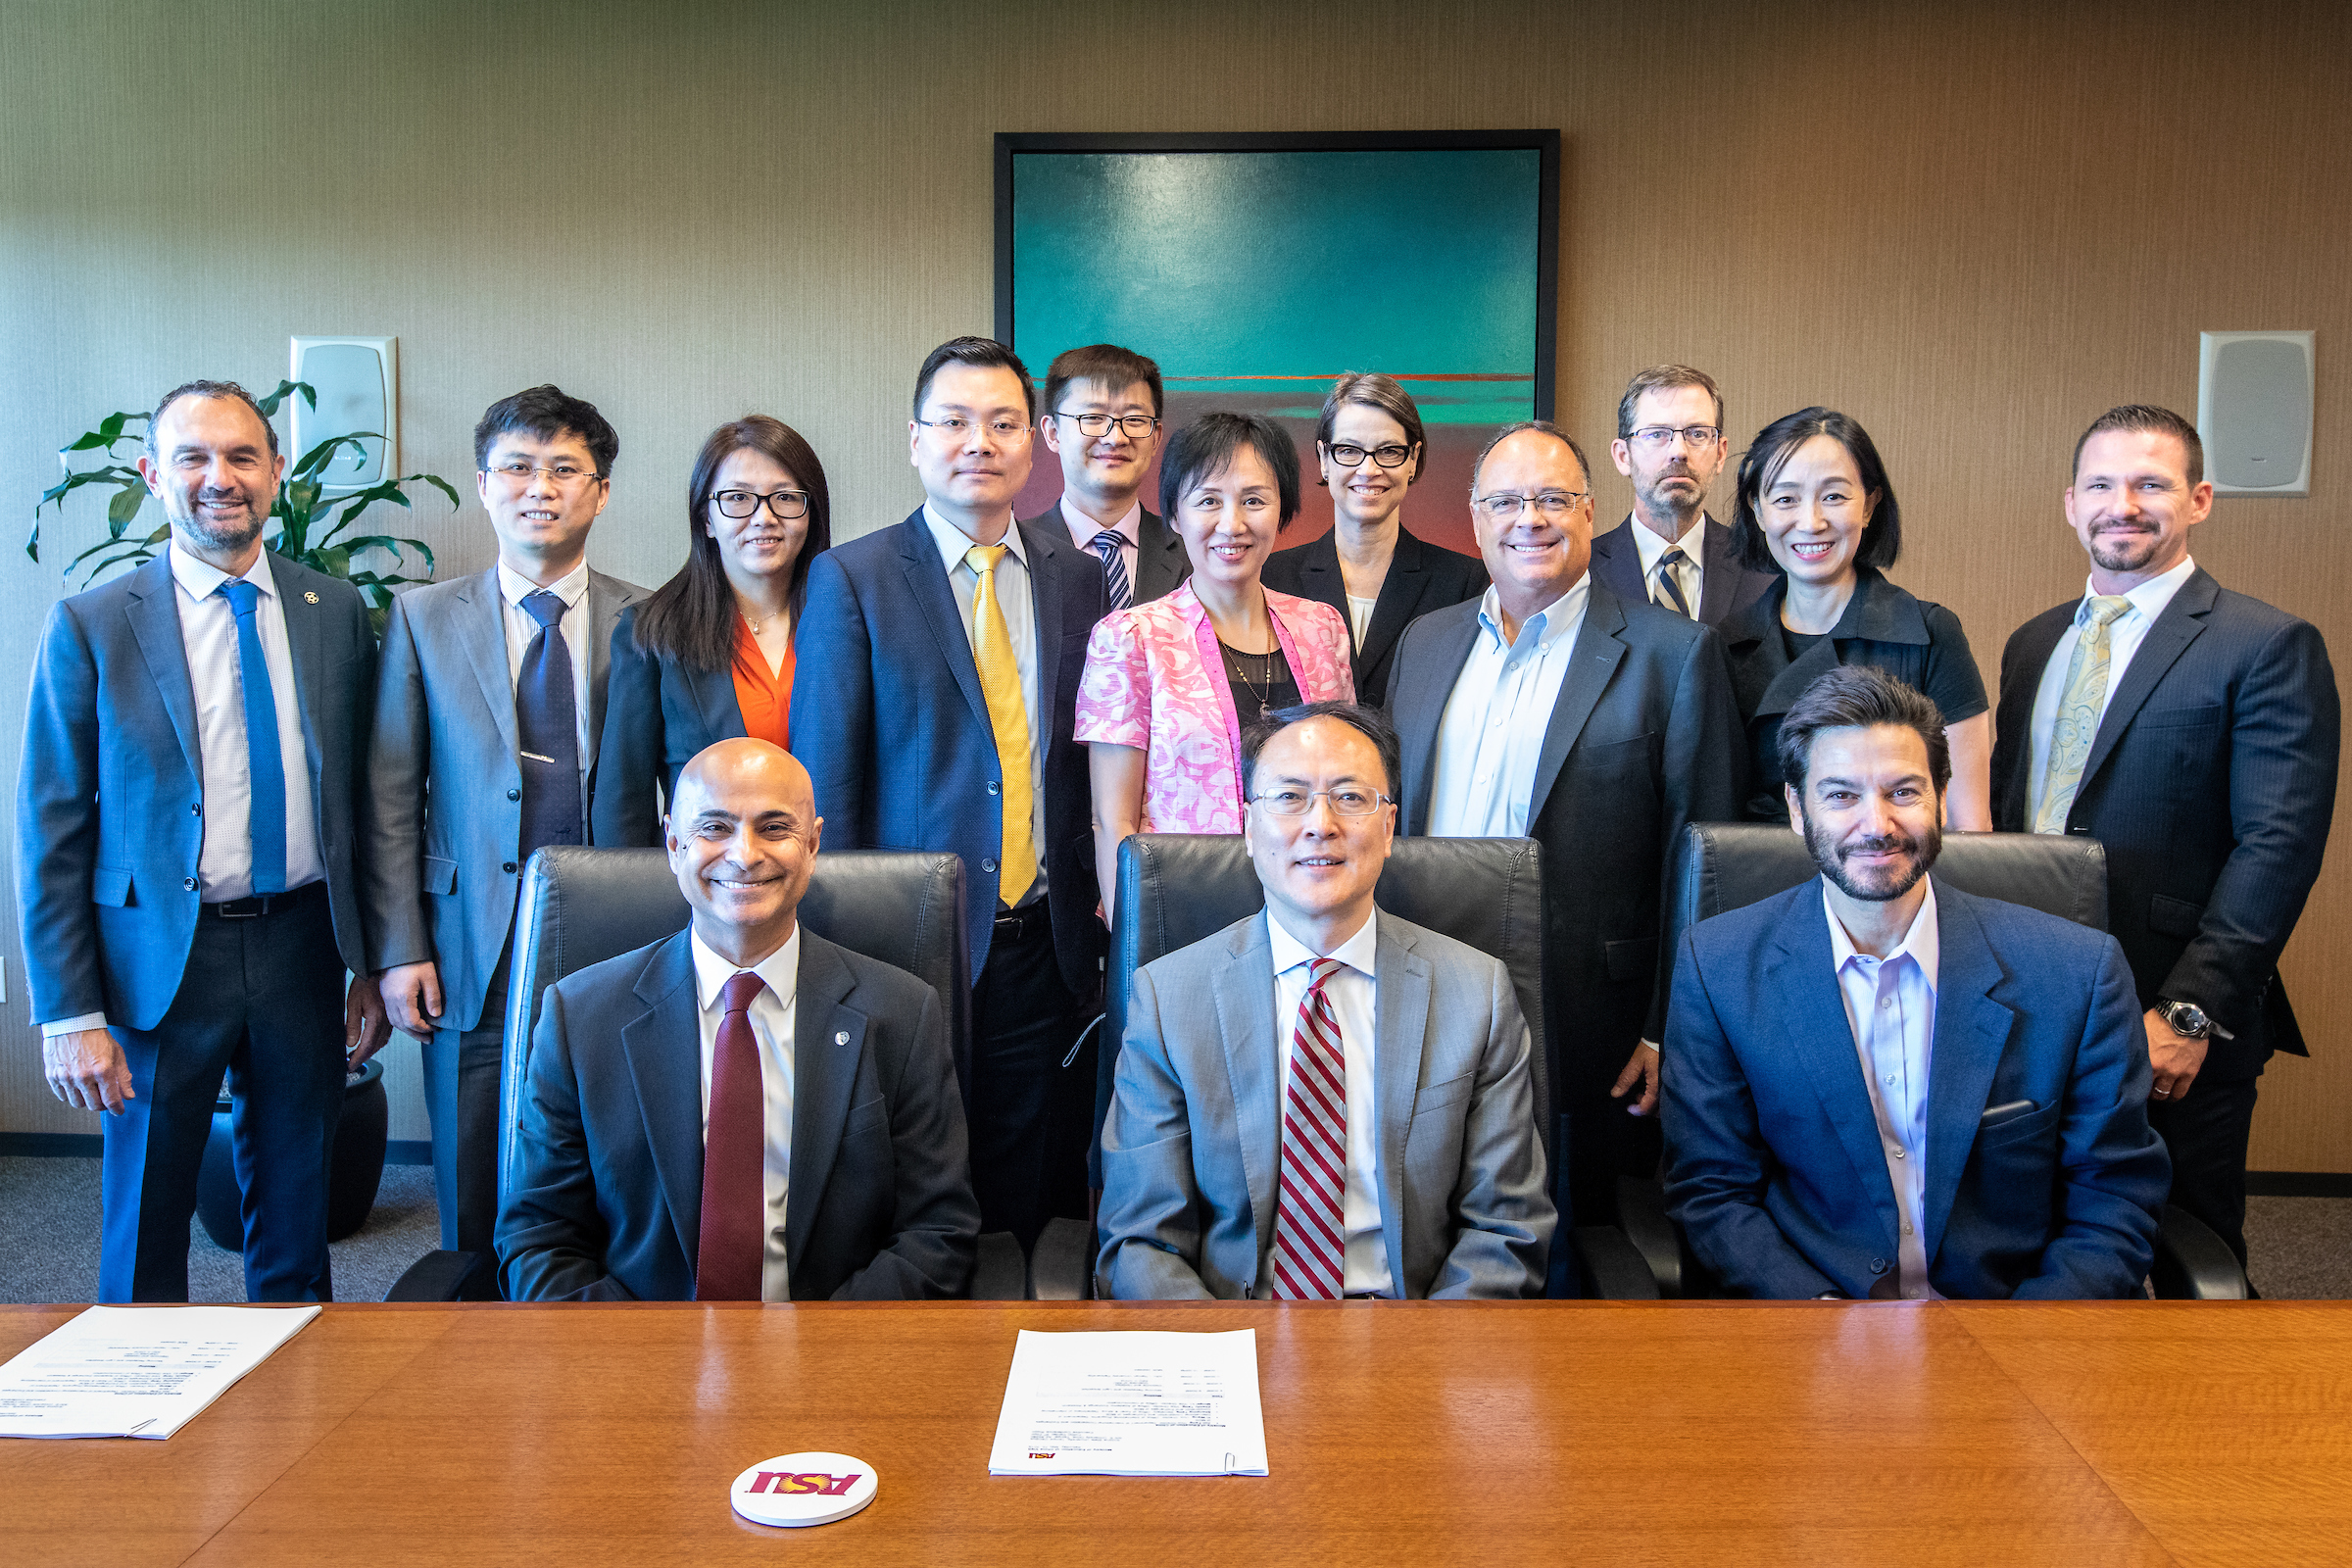 Delegates from the Ministry of Education of China and deans and administrators from ASU pose for a group picture before meeting on Saturday, May 25, 2019. The groups are looking at ways to broaden educational and research partnerships between the university and Chinese institutions. Front row, from left: Sanjeev Khagram, Jun Fang and Jonathan Koppell. Photo by Charlie Leight/ASU Now